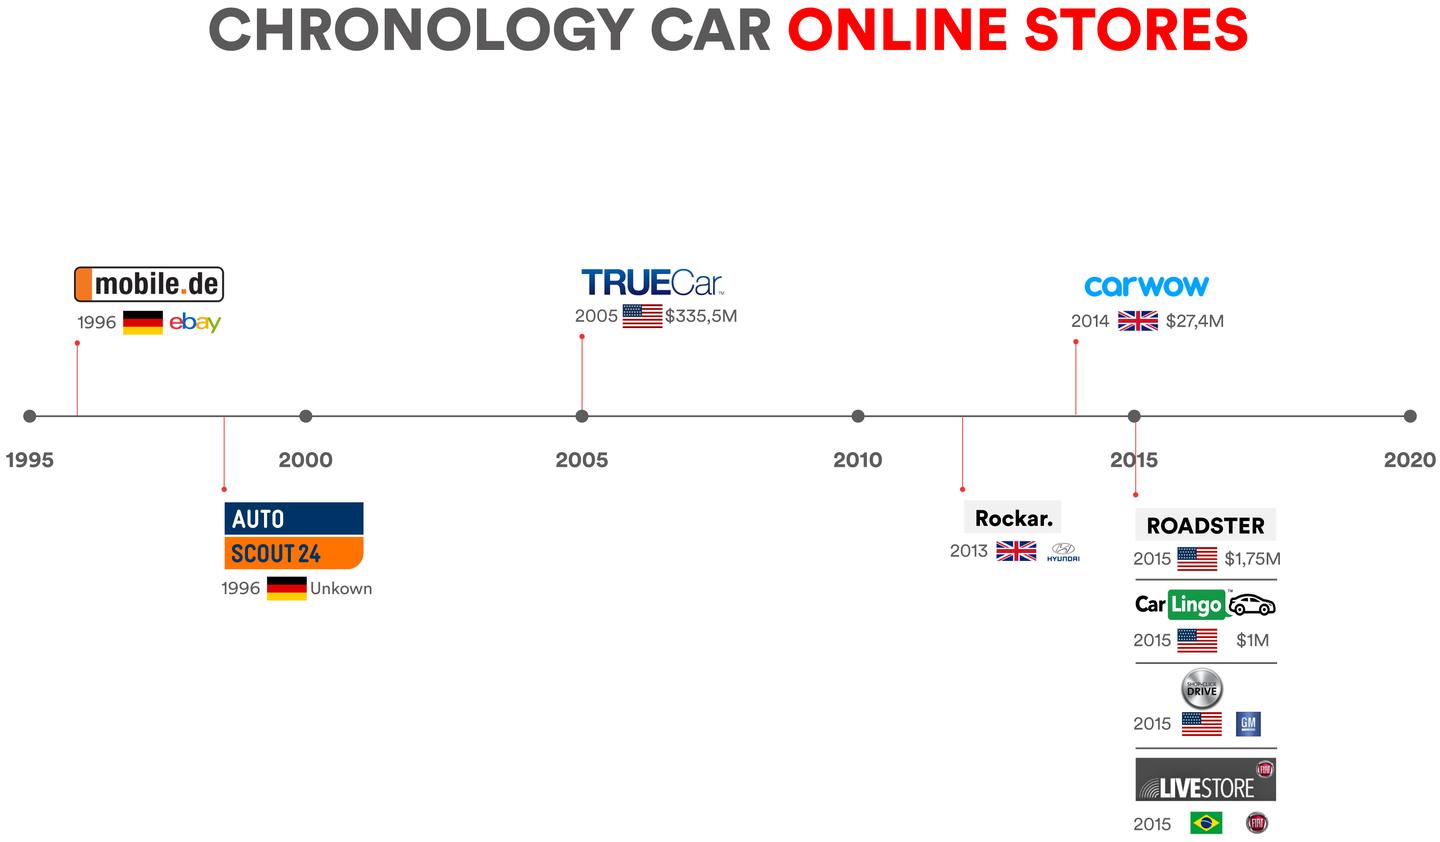 Chronology Car Online Stores